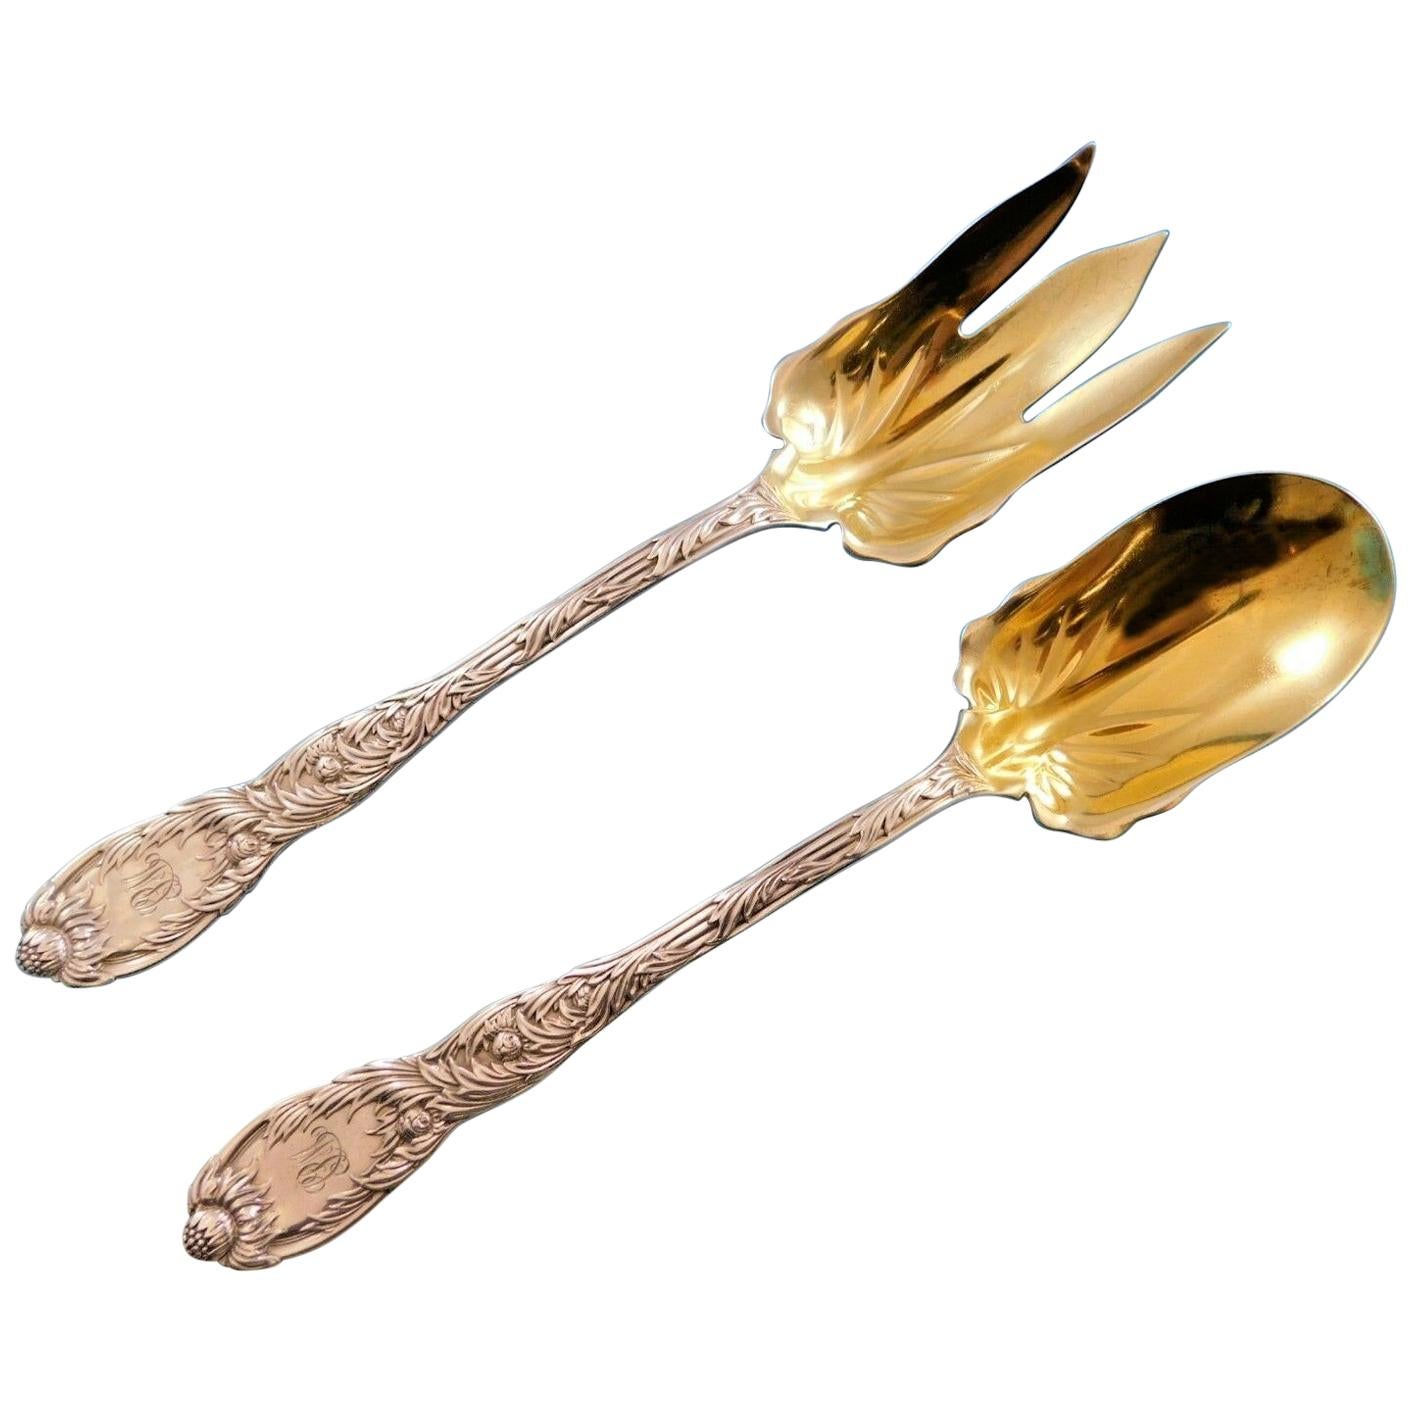 Chrysanthemum by Tiffany Sterling Silver Salad Serving Set Gold-Washed 10"